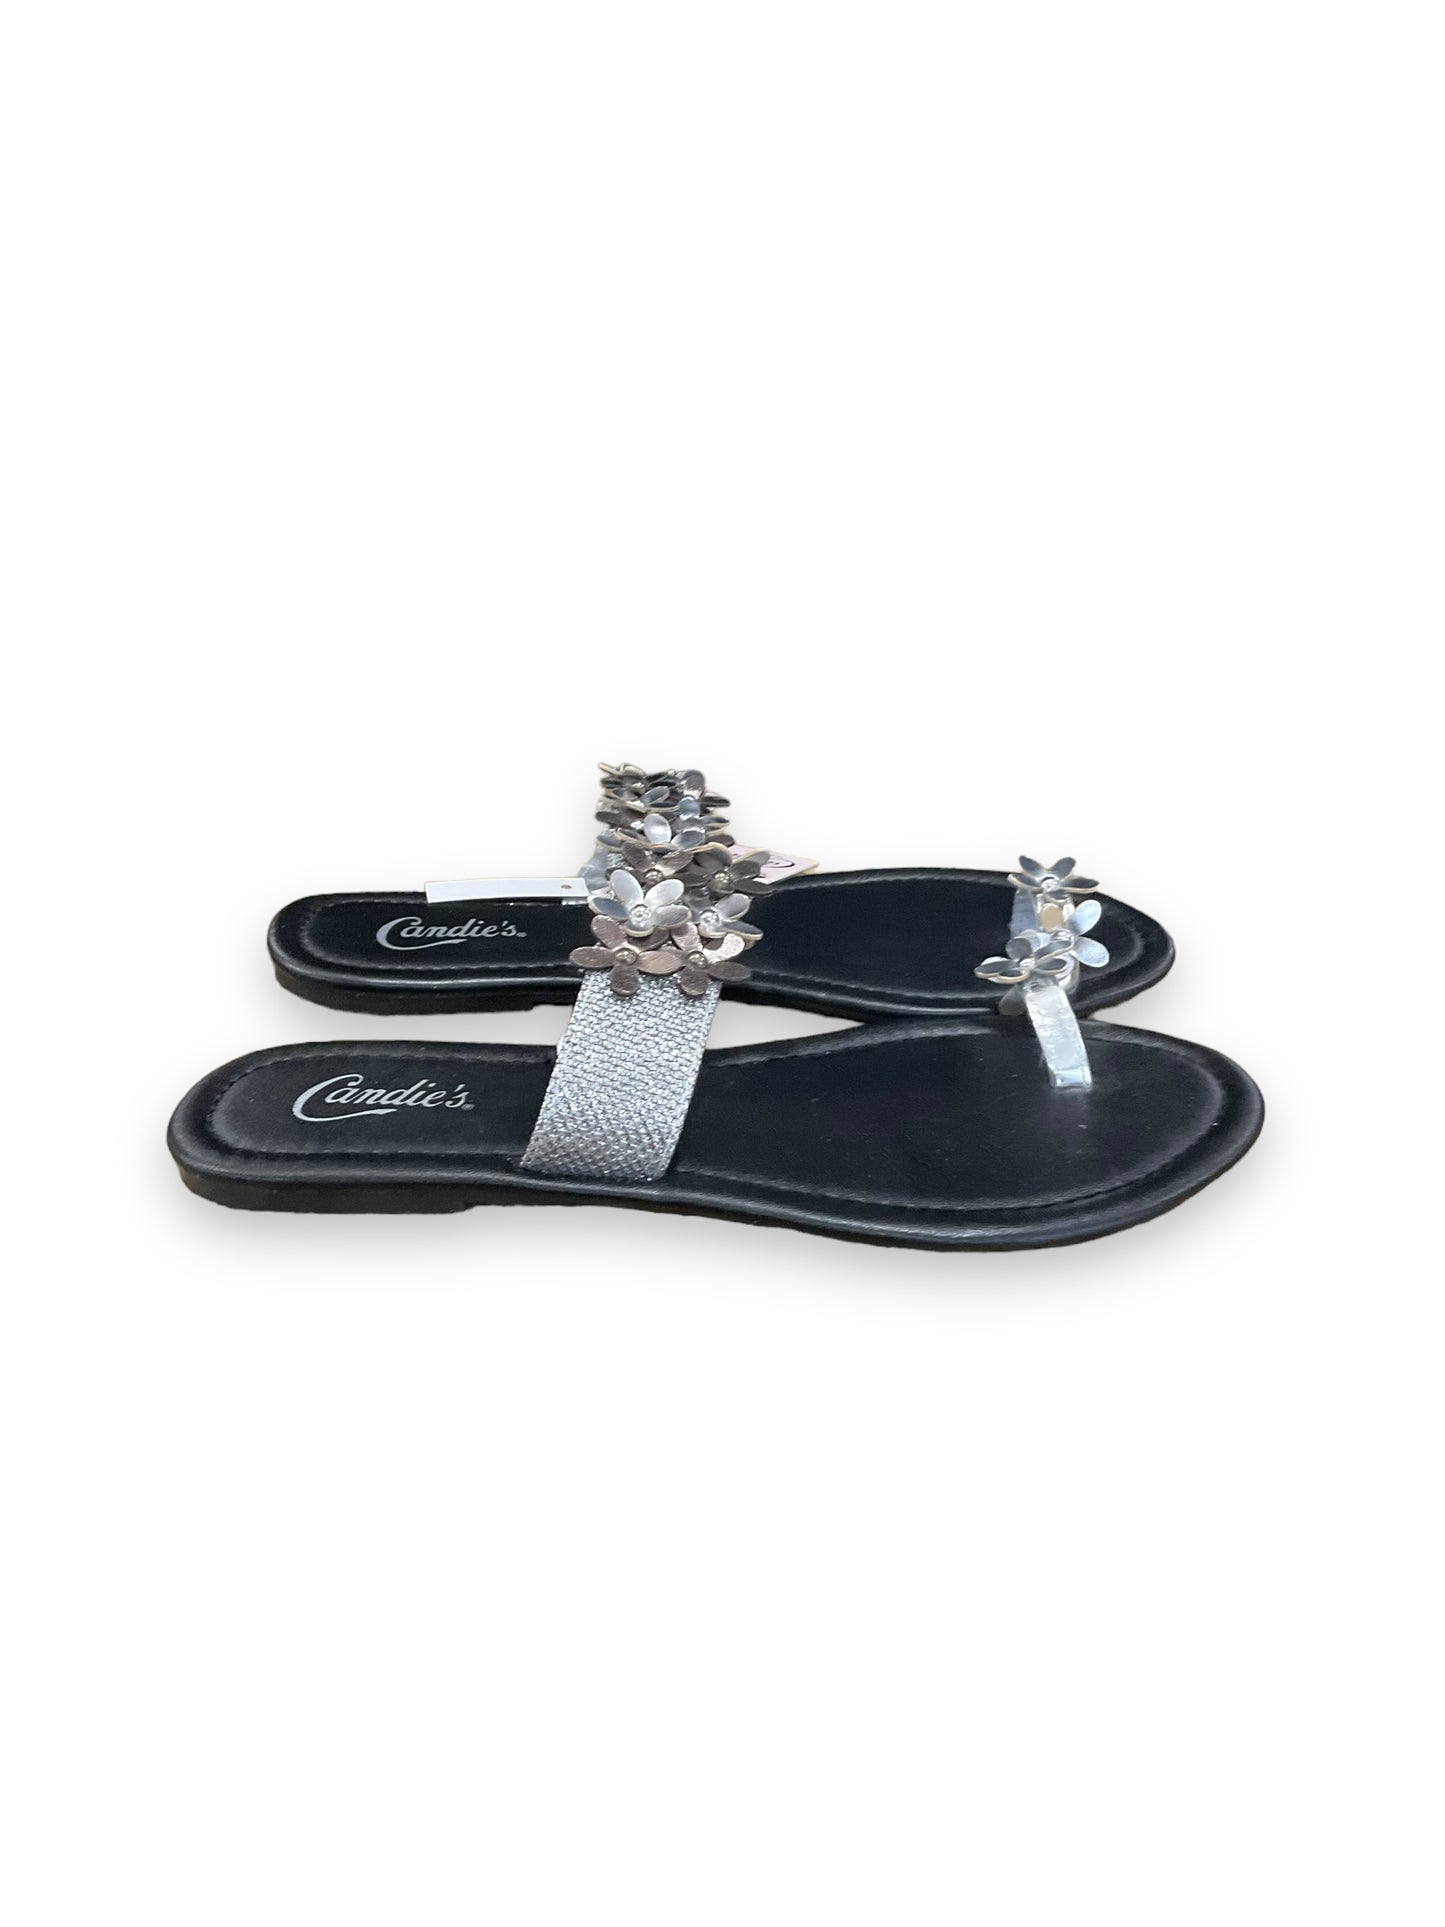 Sandals Flats By Candies  Size: 8